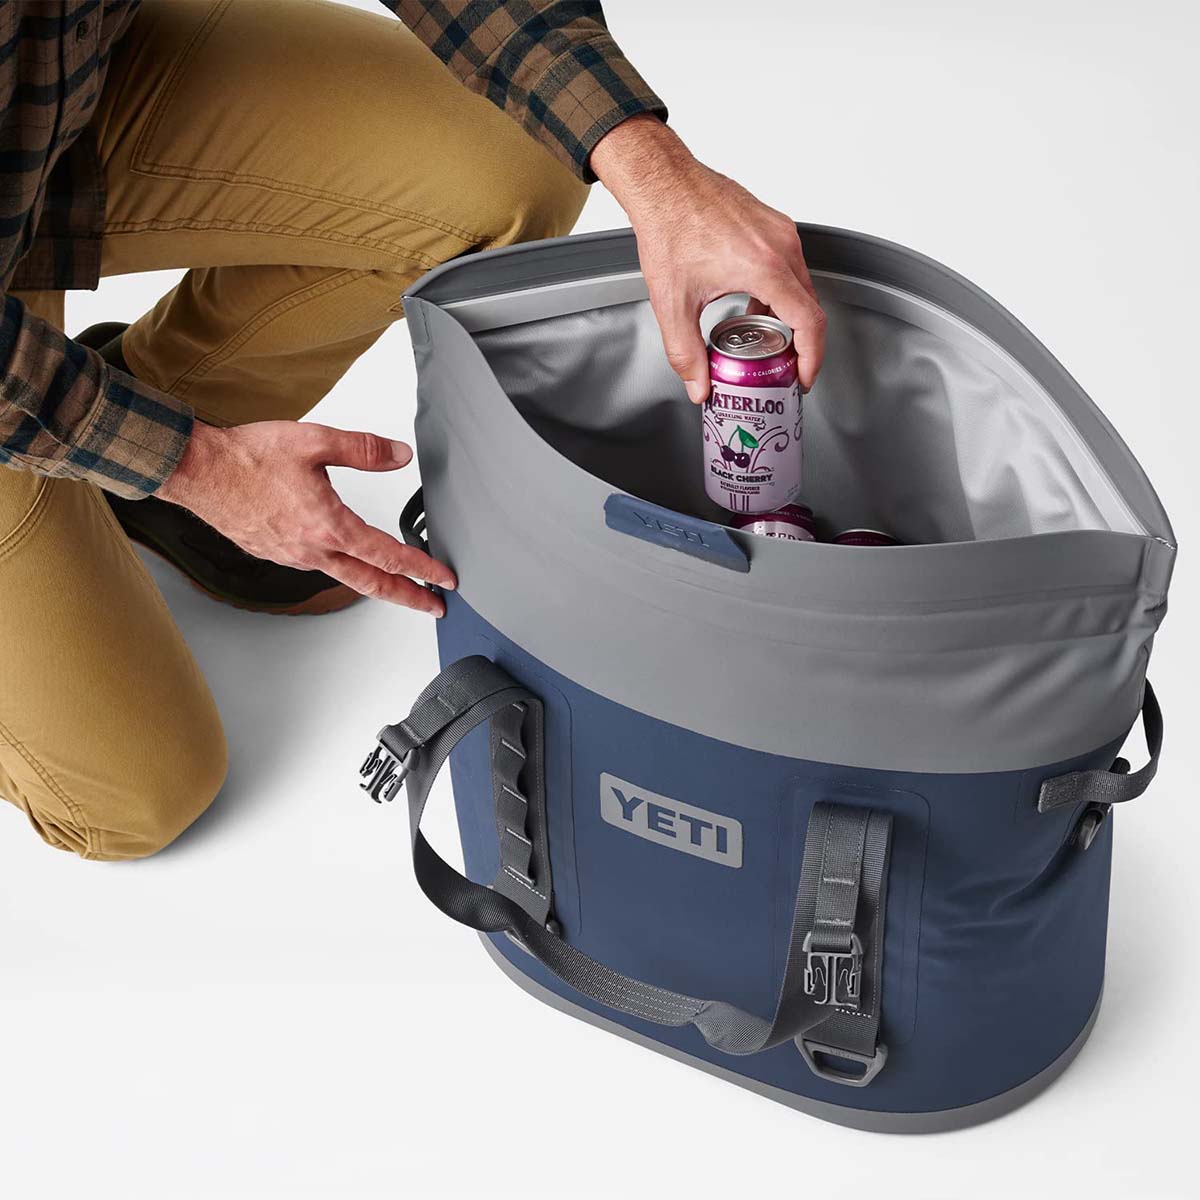 Genius Products to Help You Stay Cool Option Yeti Hopper Portable Soft Cooler